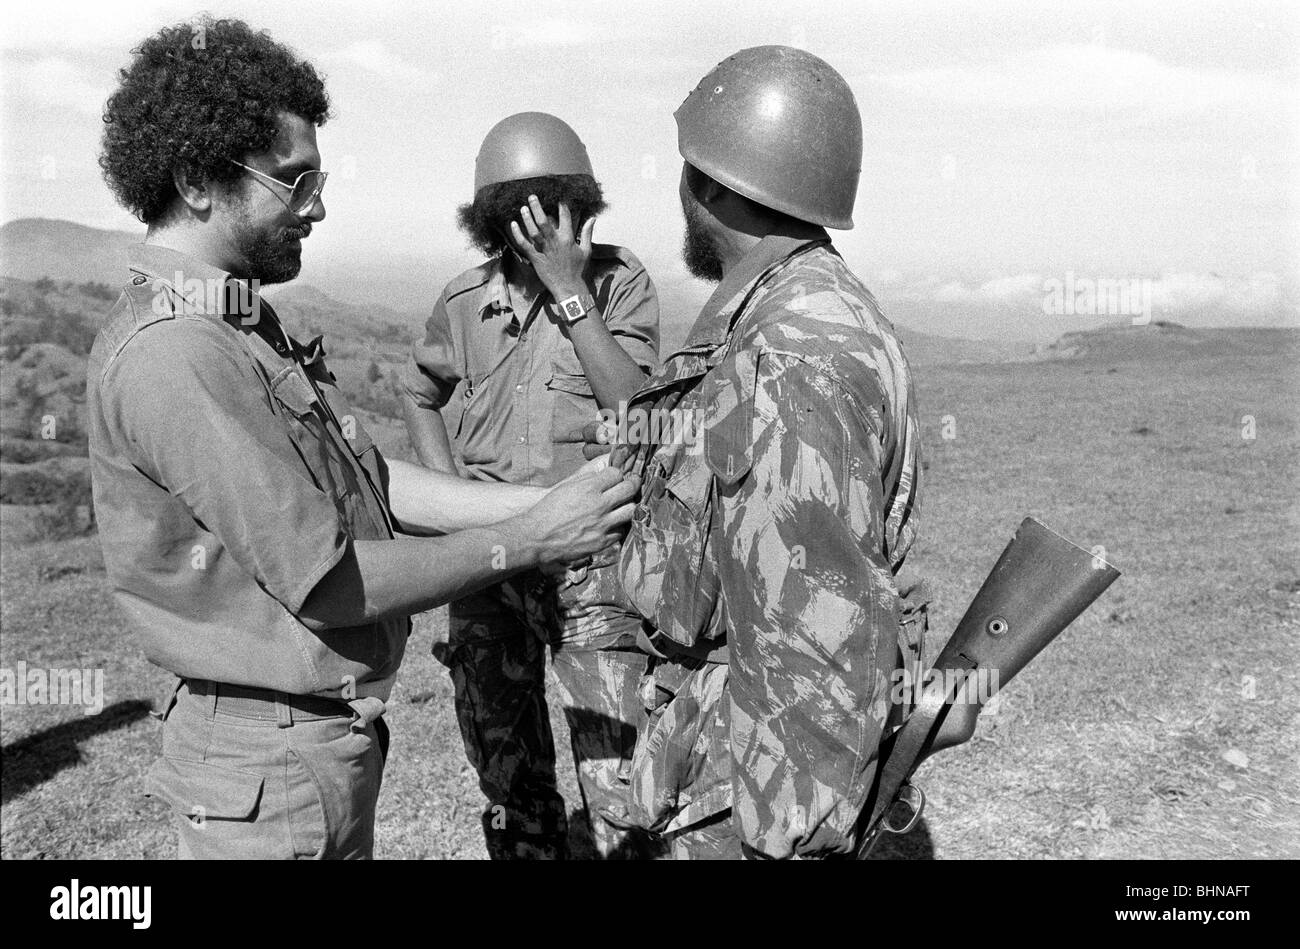 Jose Ramos-Horta fastens Fretilin commander's jacket while defending East Timor against Indonesian incursion in mountains Stock Photo